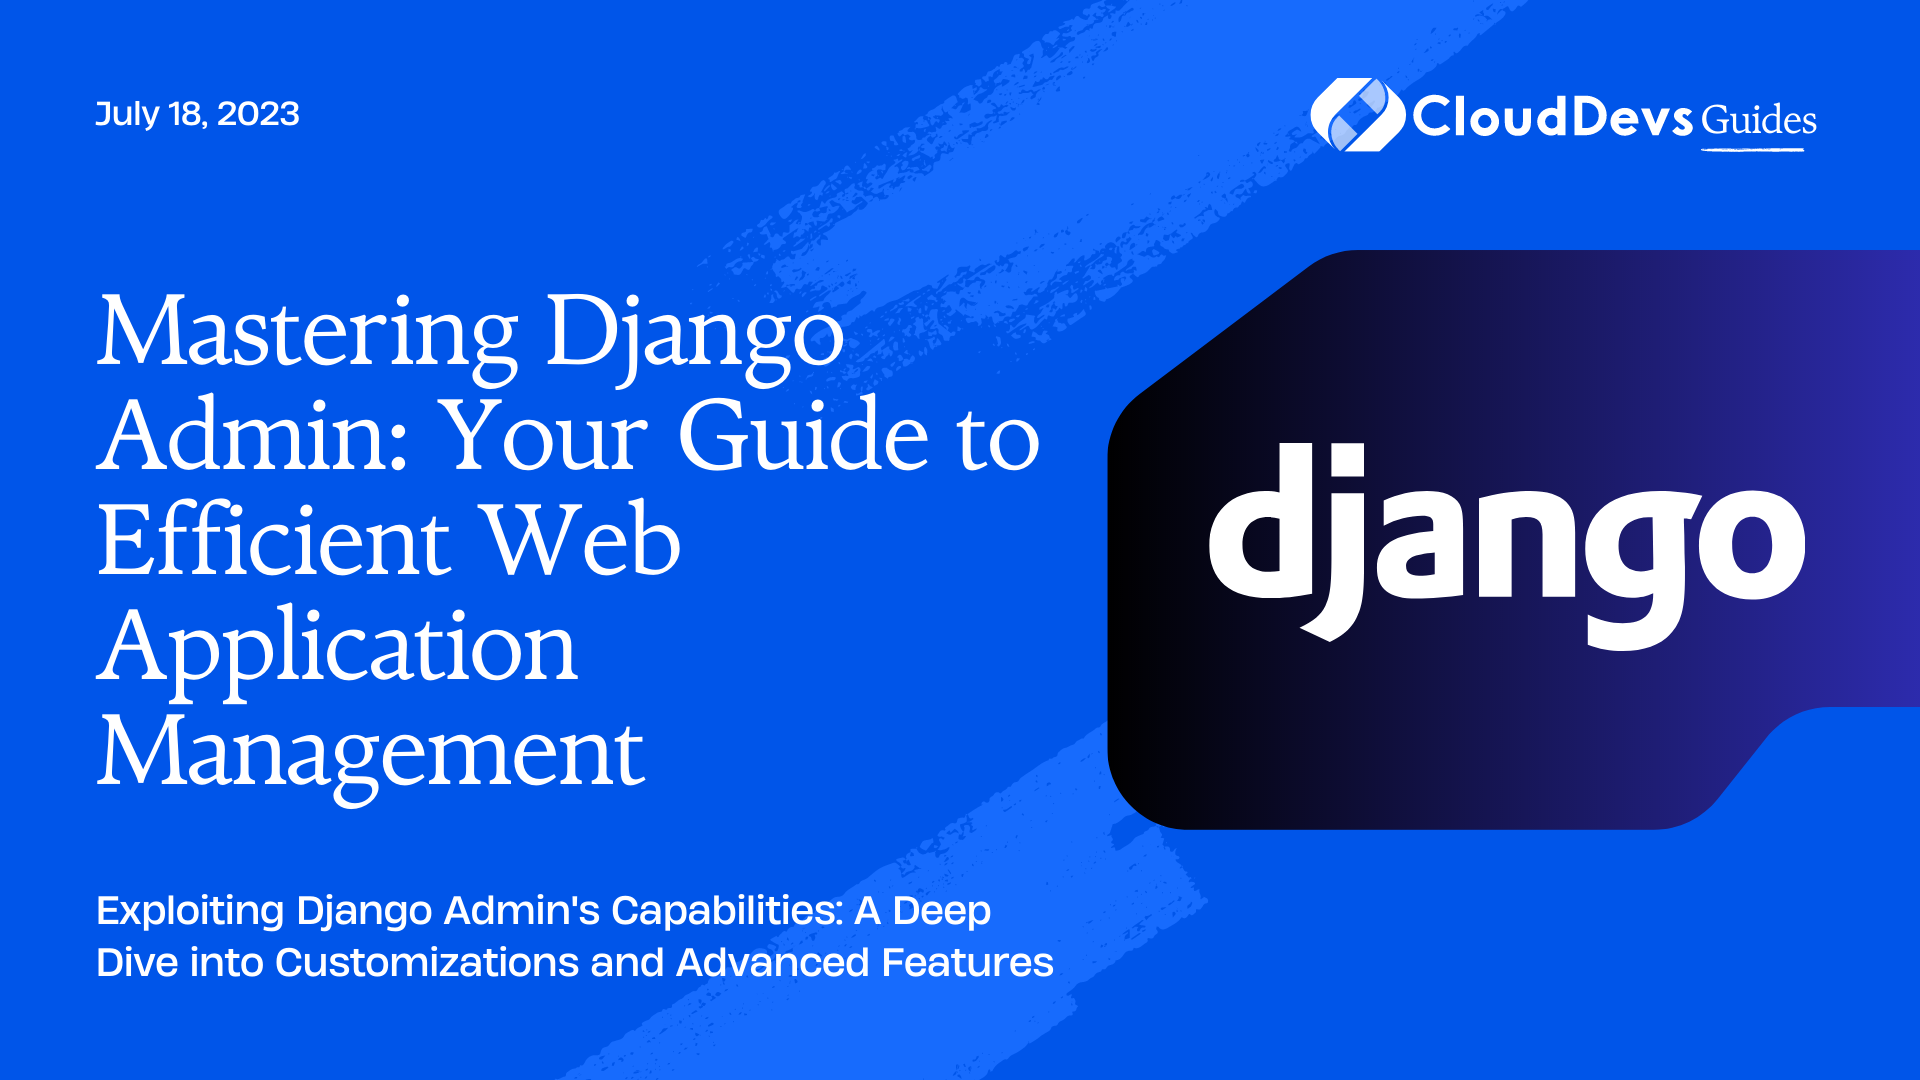 Mastering Django Admin: Your Guide to Efficient Web Application Management